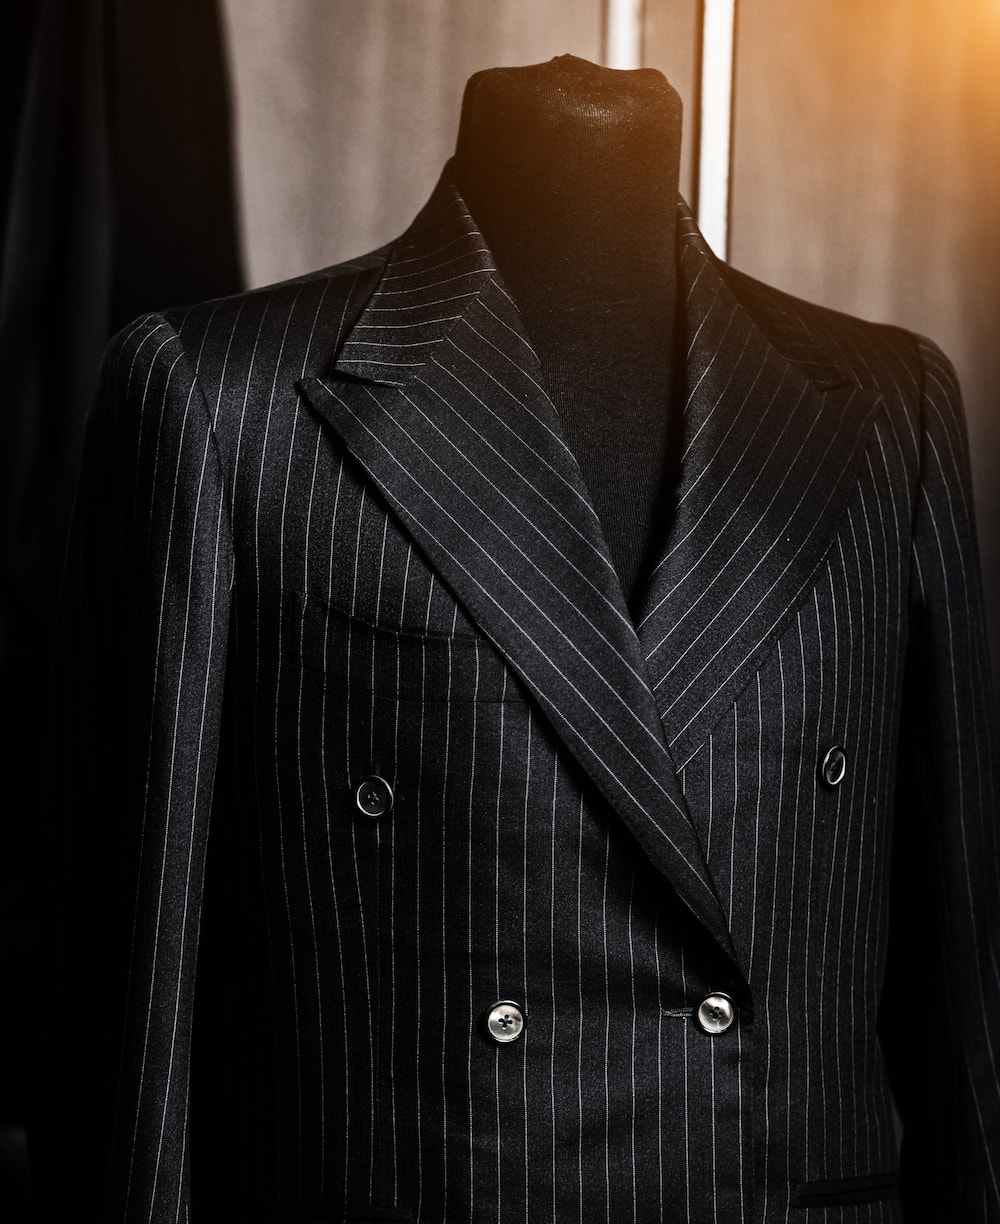 Top 15 most expensive suits in the world: What are the most expensive ...